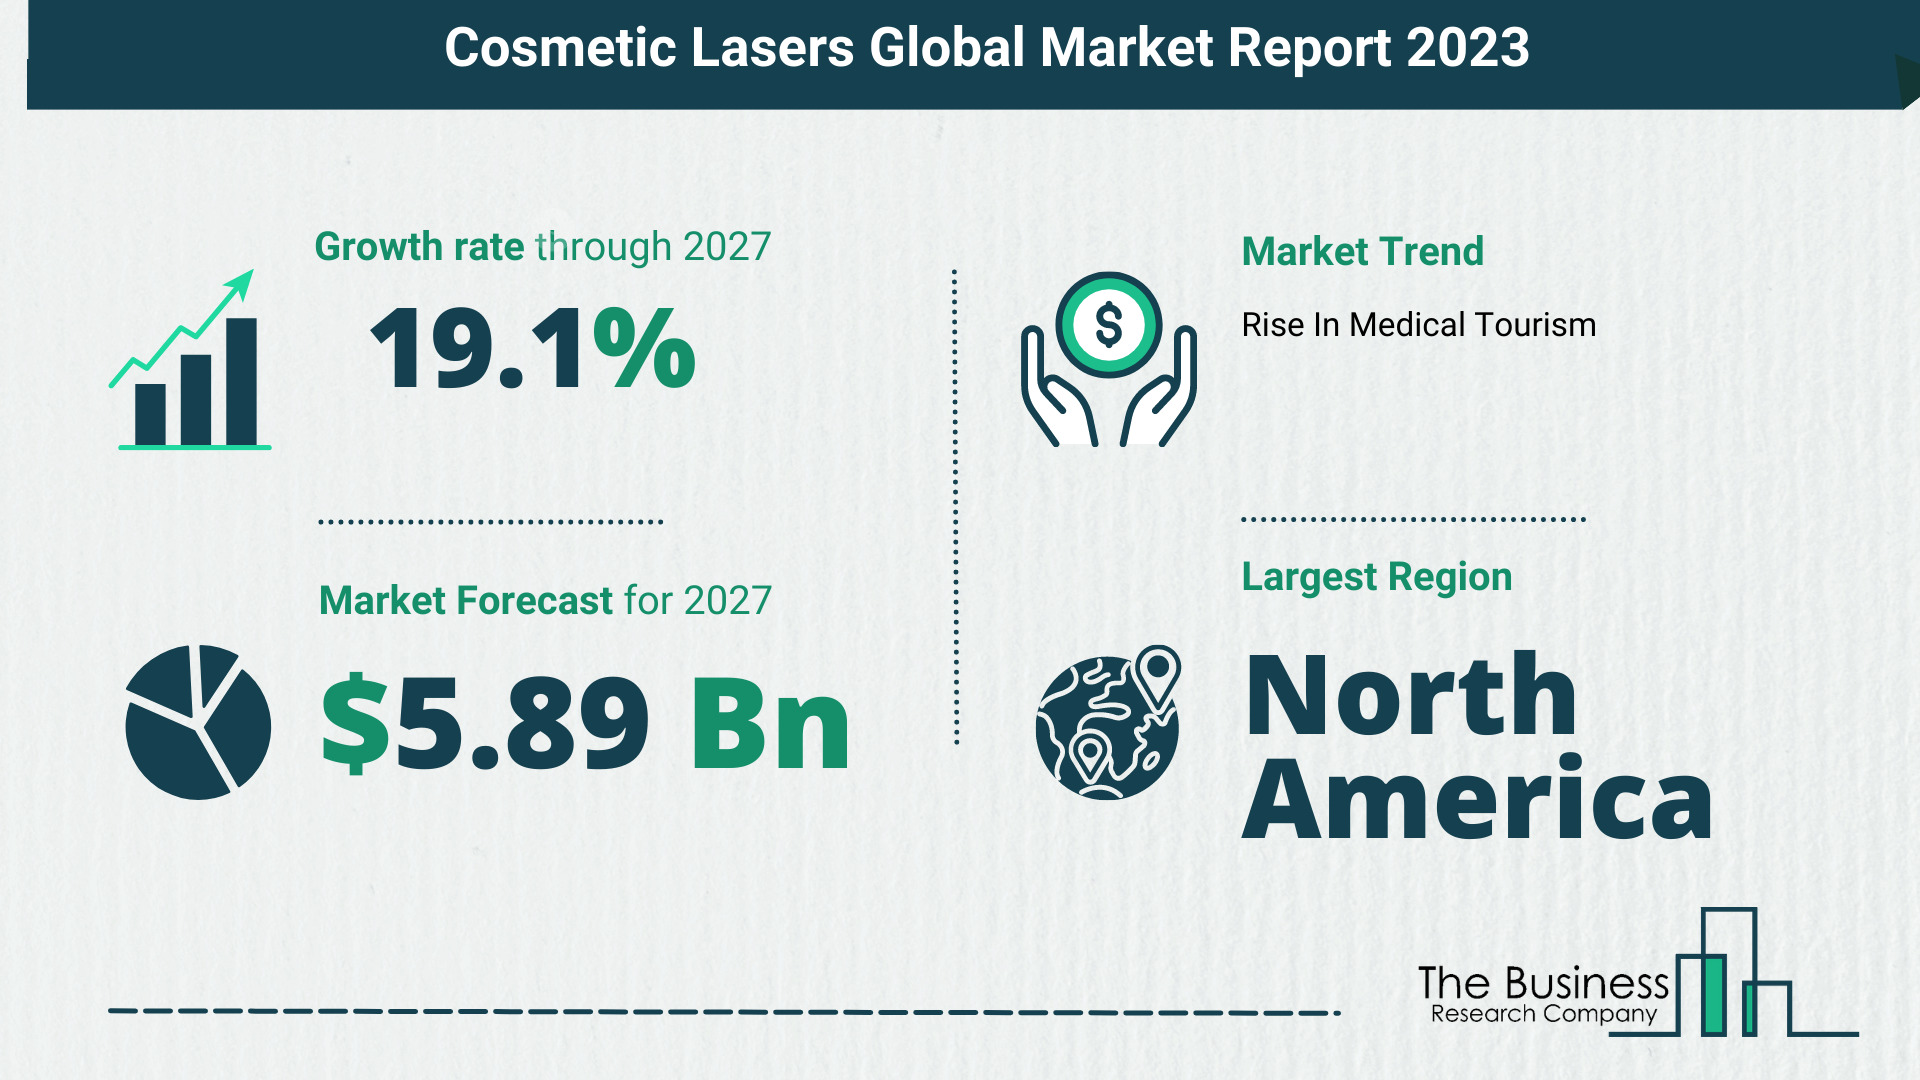 How Will The Cosmetic Lasers Market Size Grow In The Coming Years?